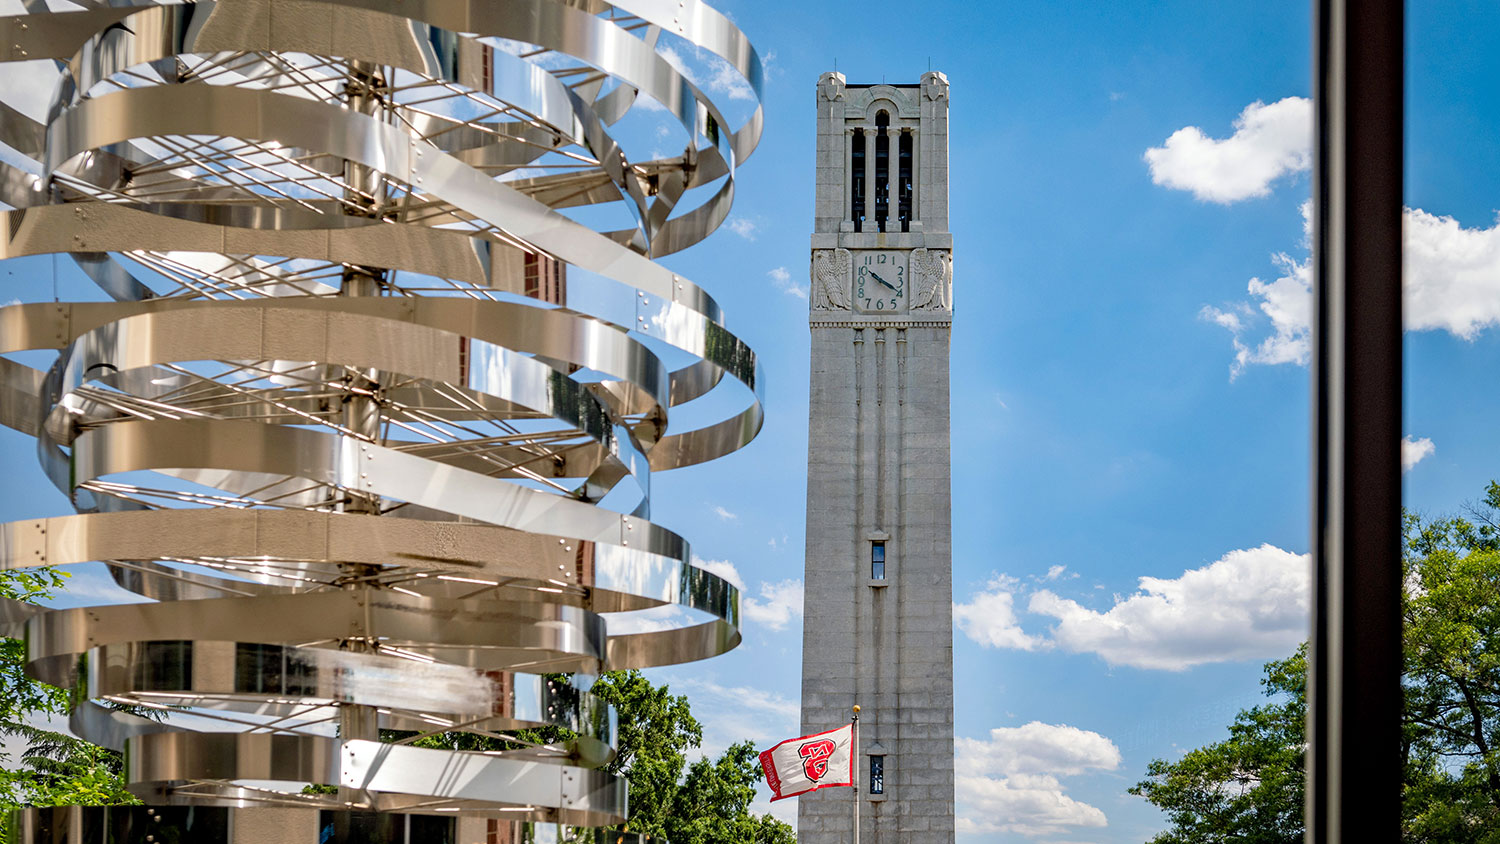 Public art spiral in front of NC State Bell tower and flag